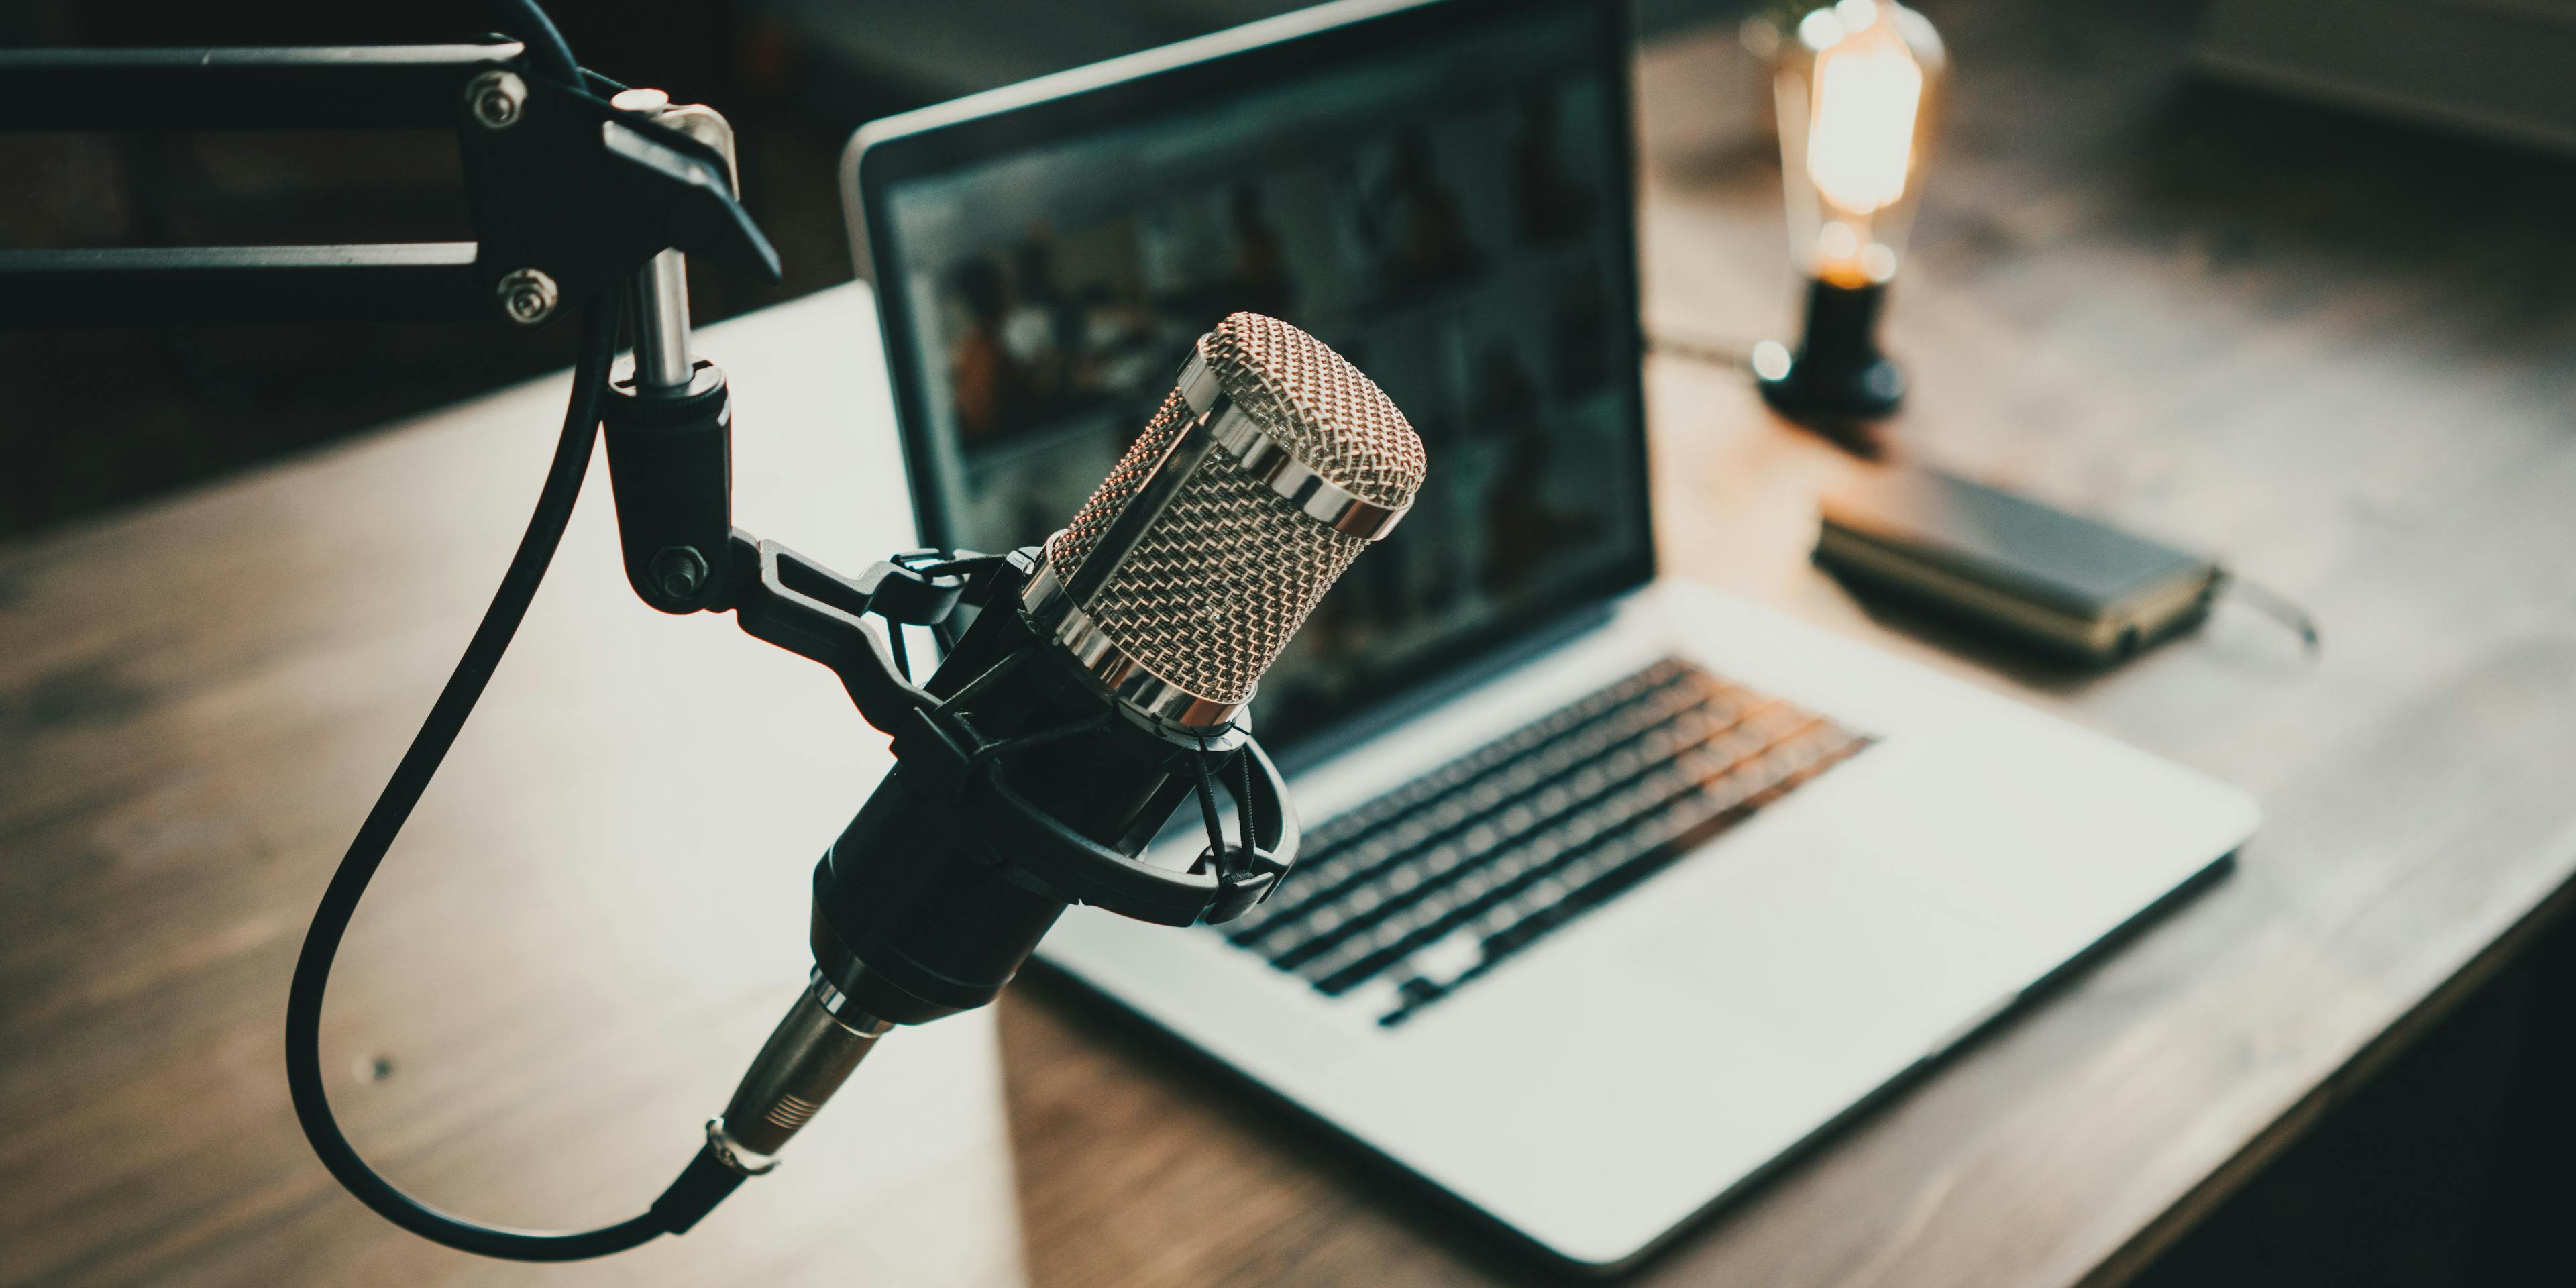 at-home podcast setup | Image credit: Alex from the Rock - stock.adobe.com